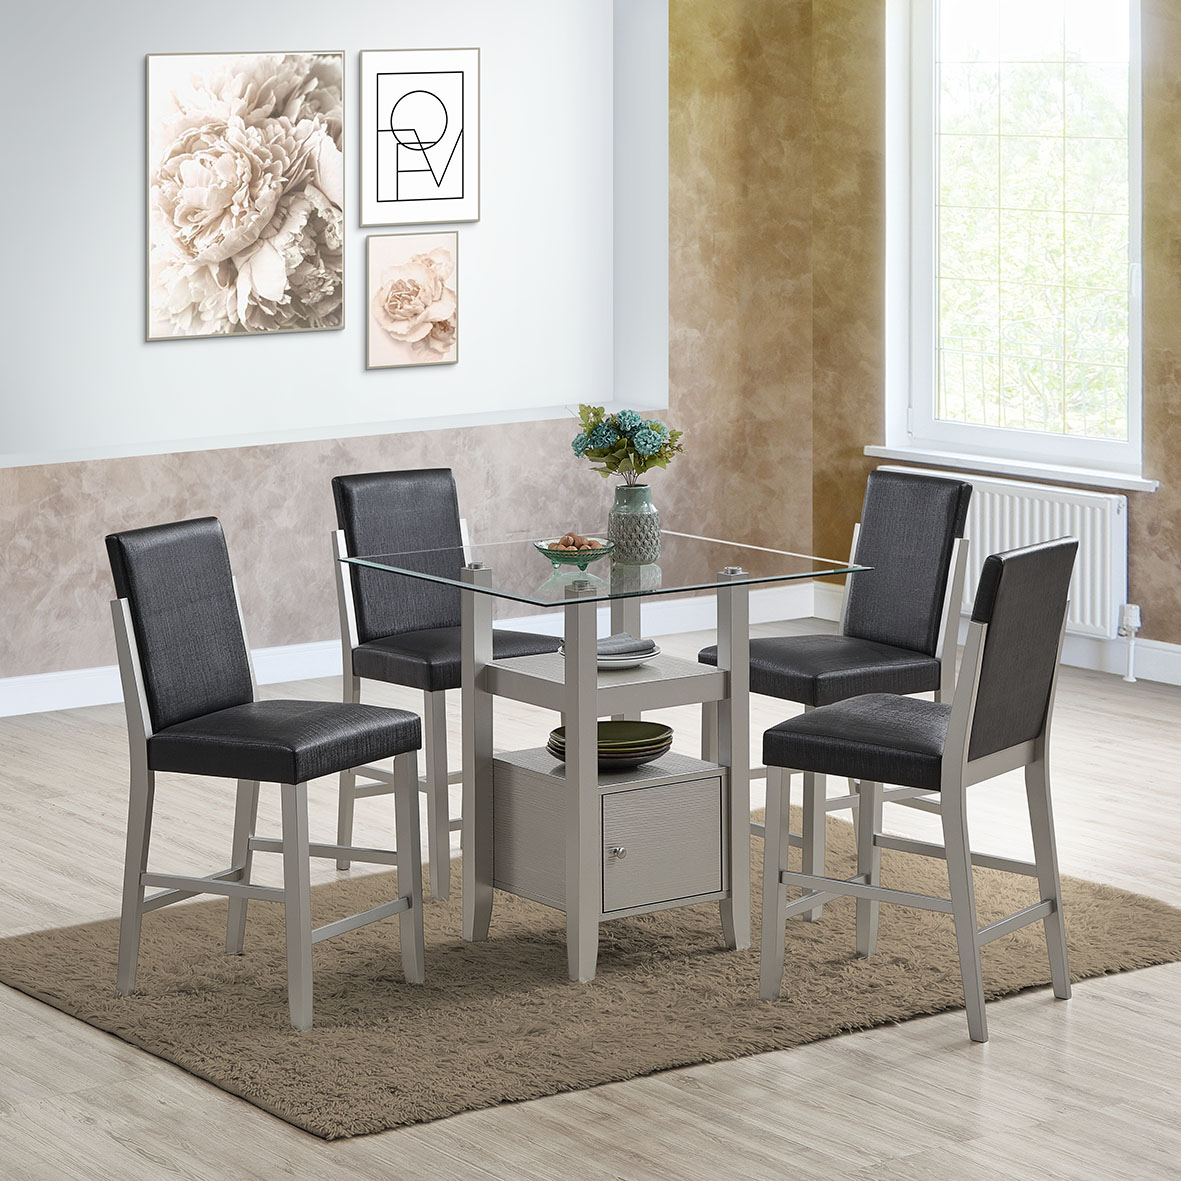 Acelyn Counter Height Dining Set (Black)